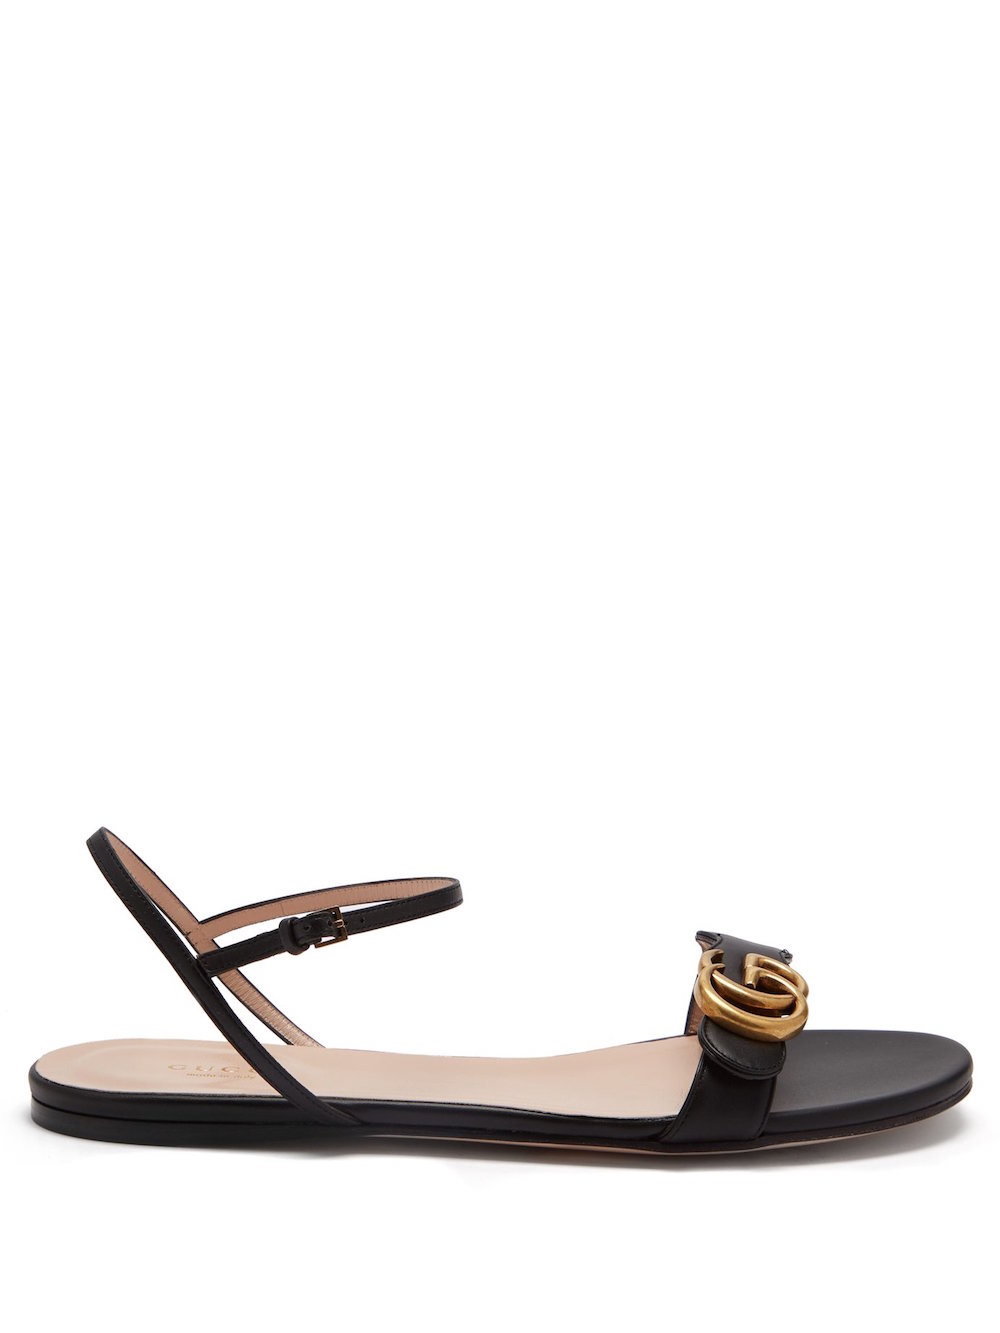 Gucci - GG Marmont Leather Sandals - Black | FASHION STYLE FAN